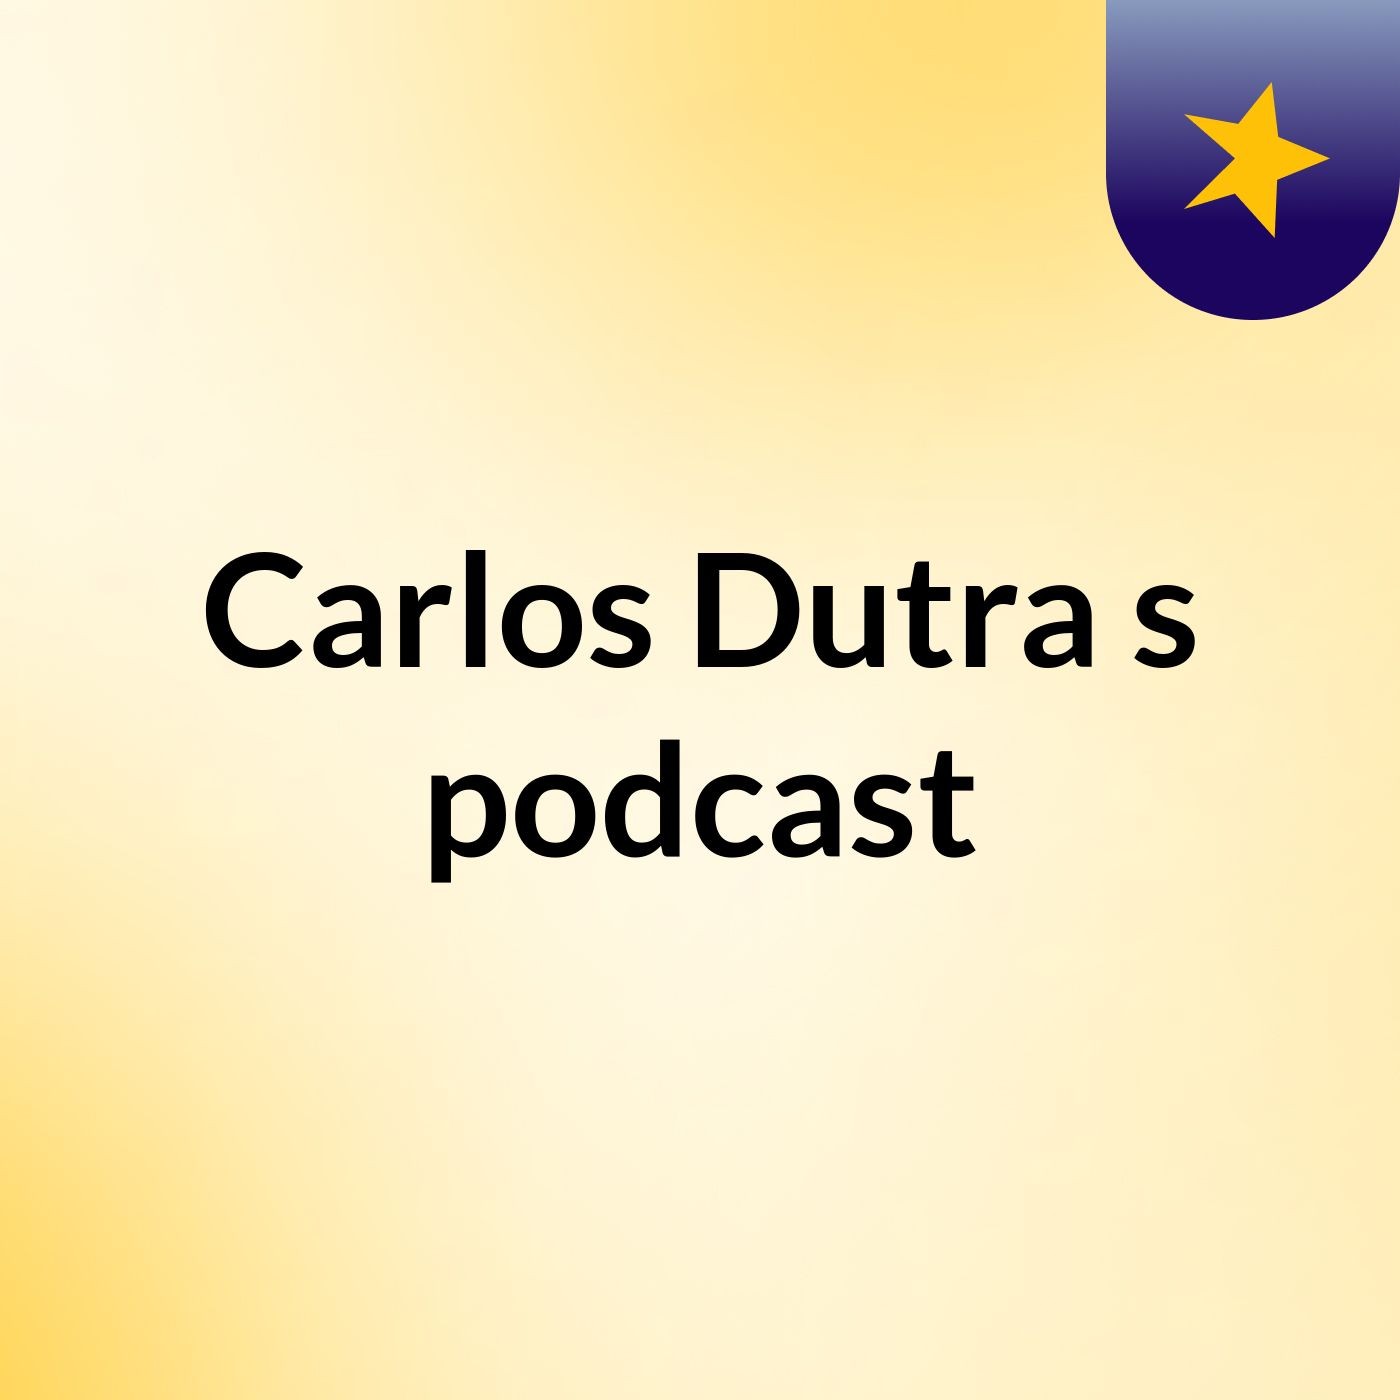 Carlos Dutra's podcast